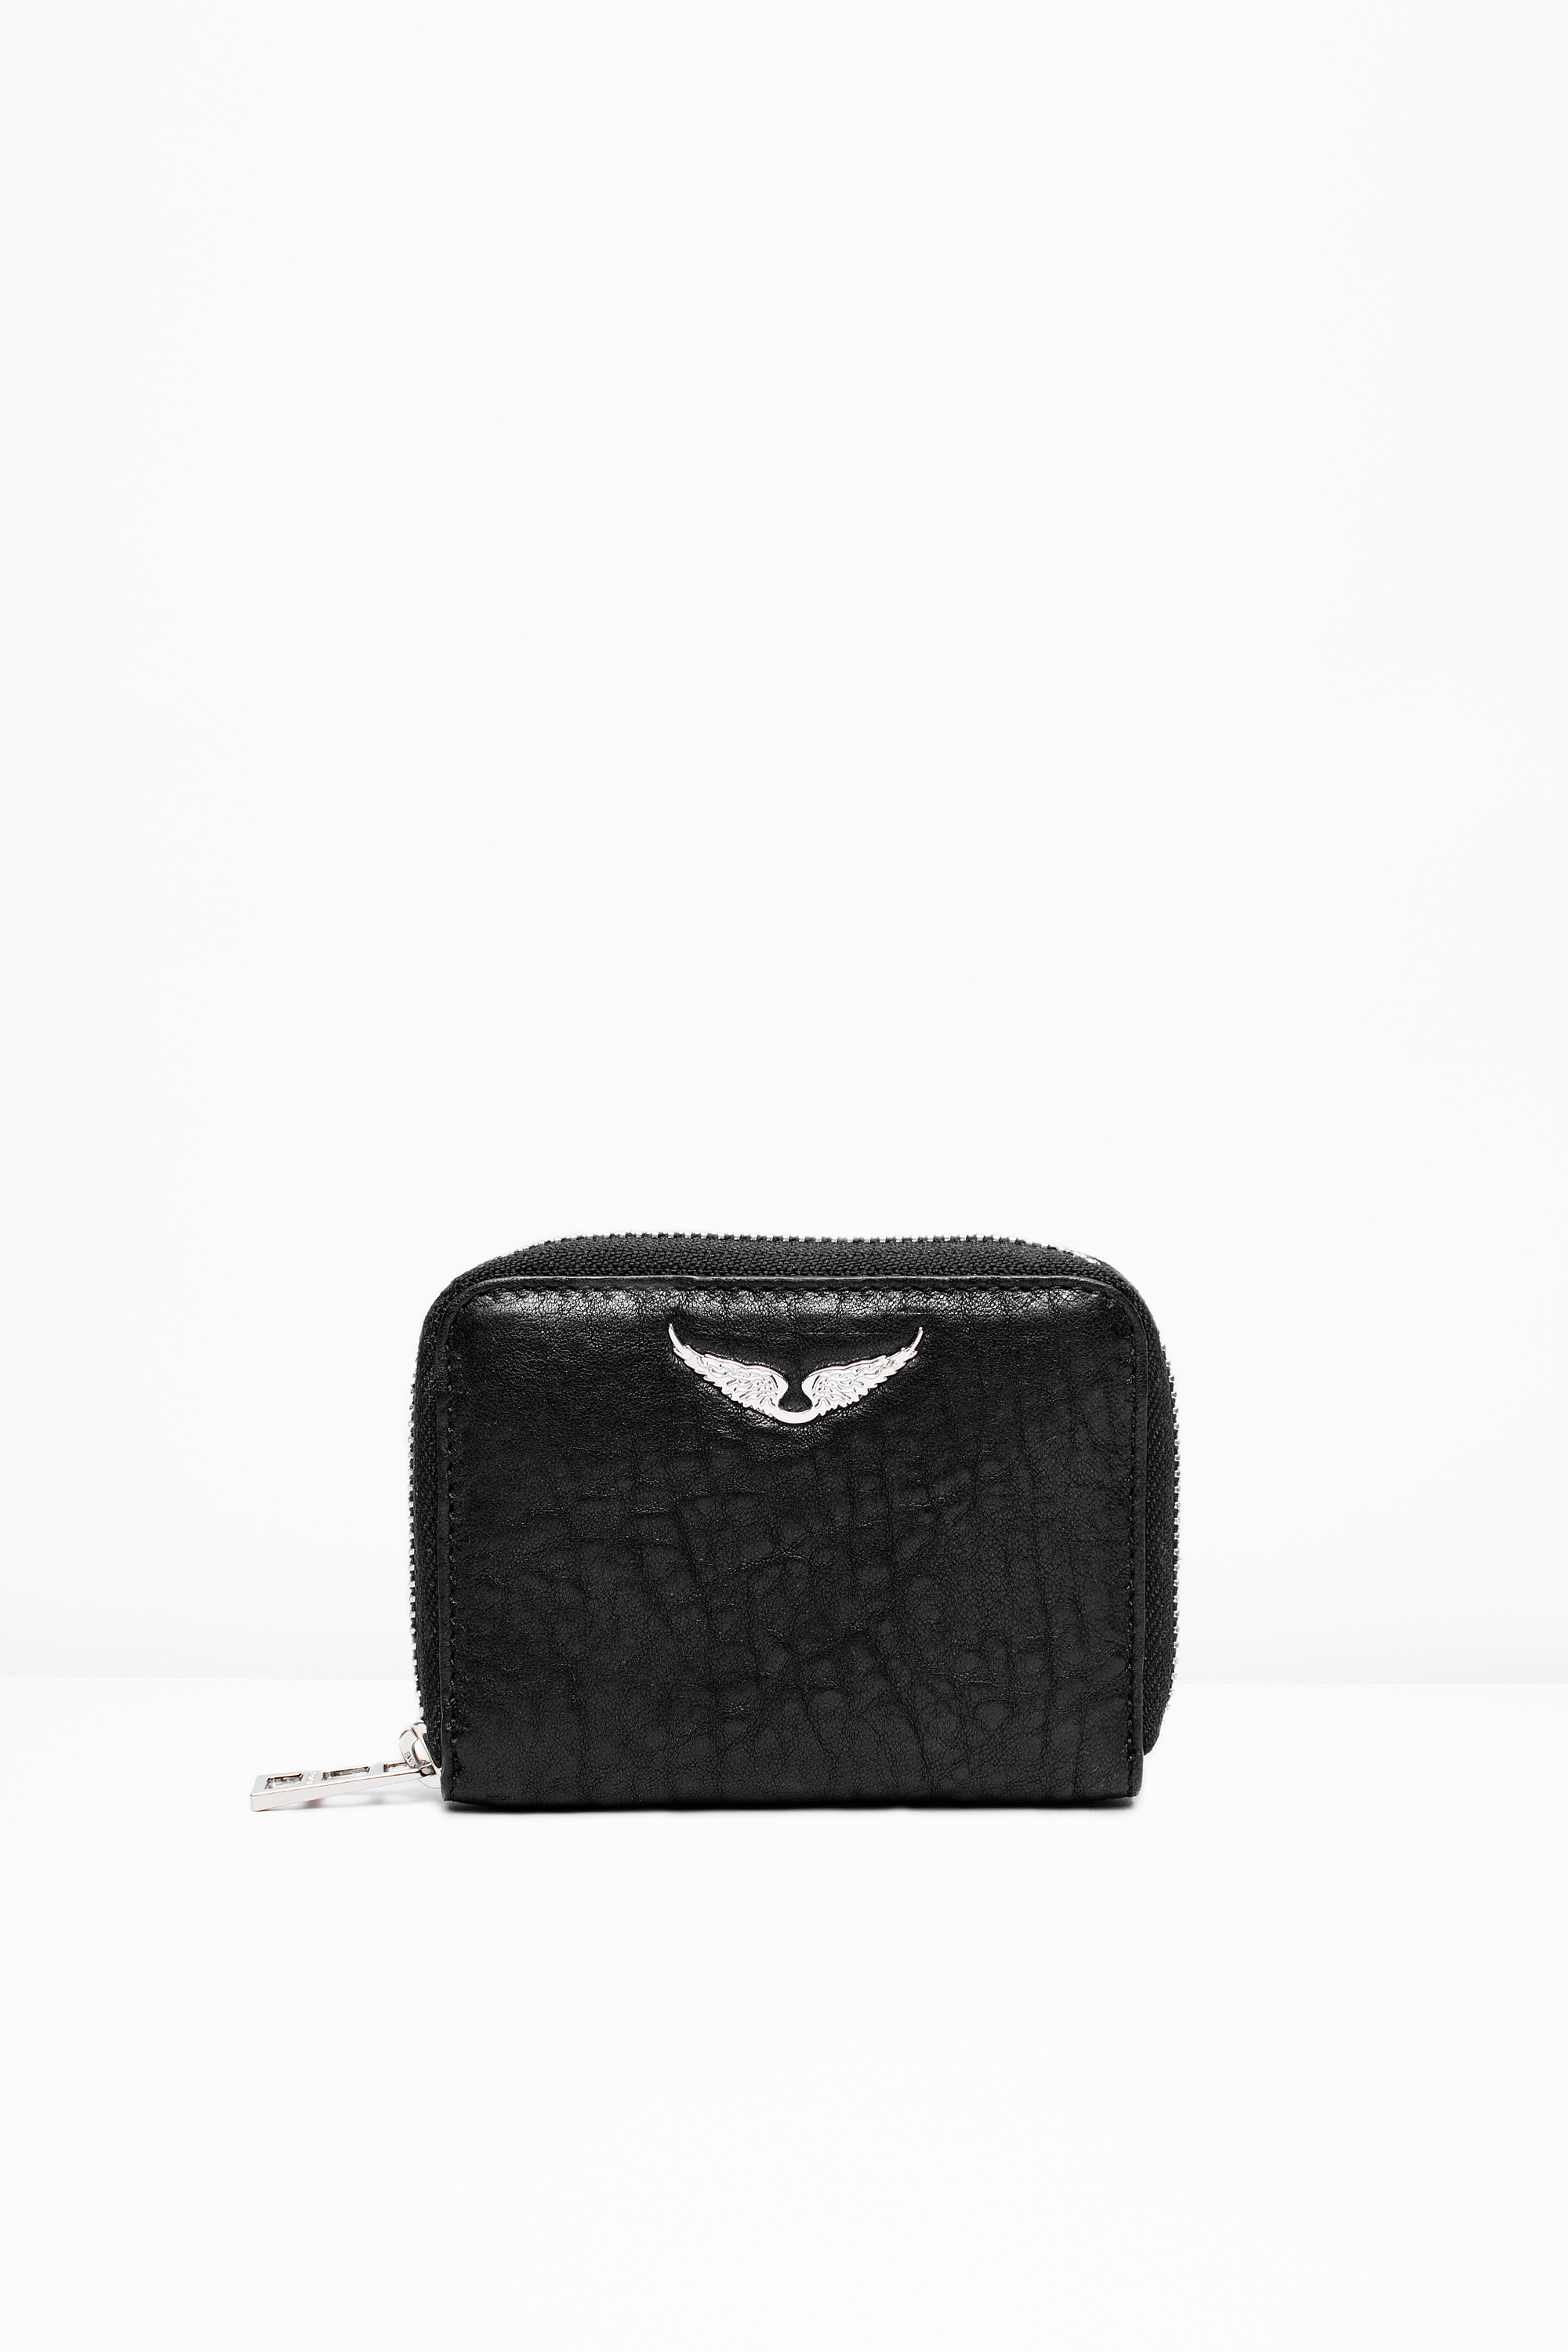 Zadig & Voltaire Leather Small Zv Bubble Wallet in Black - Lyst